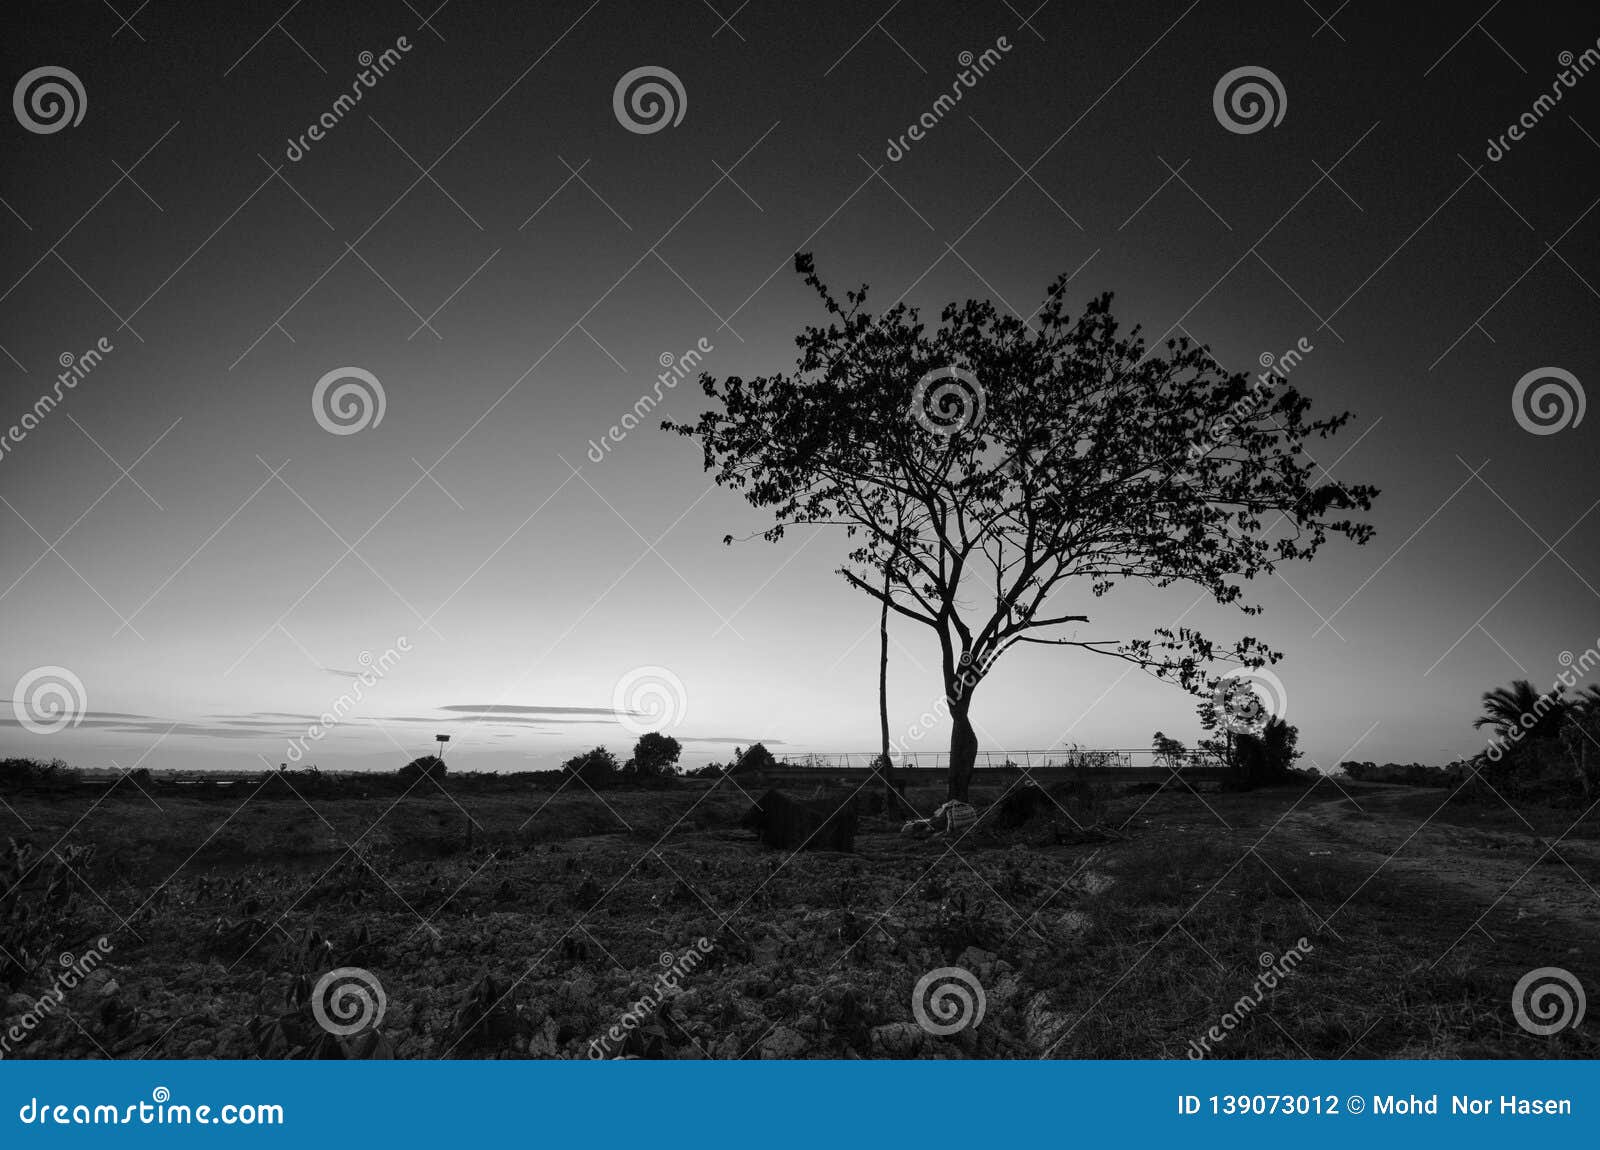 black and white image of the lonely desolated trees,ÃÂ  with moody stormy sky in the background.